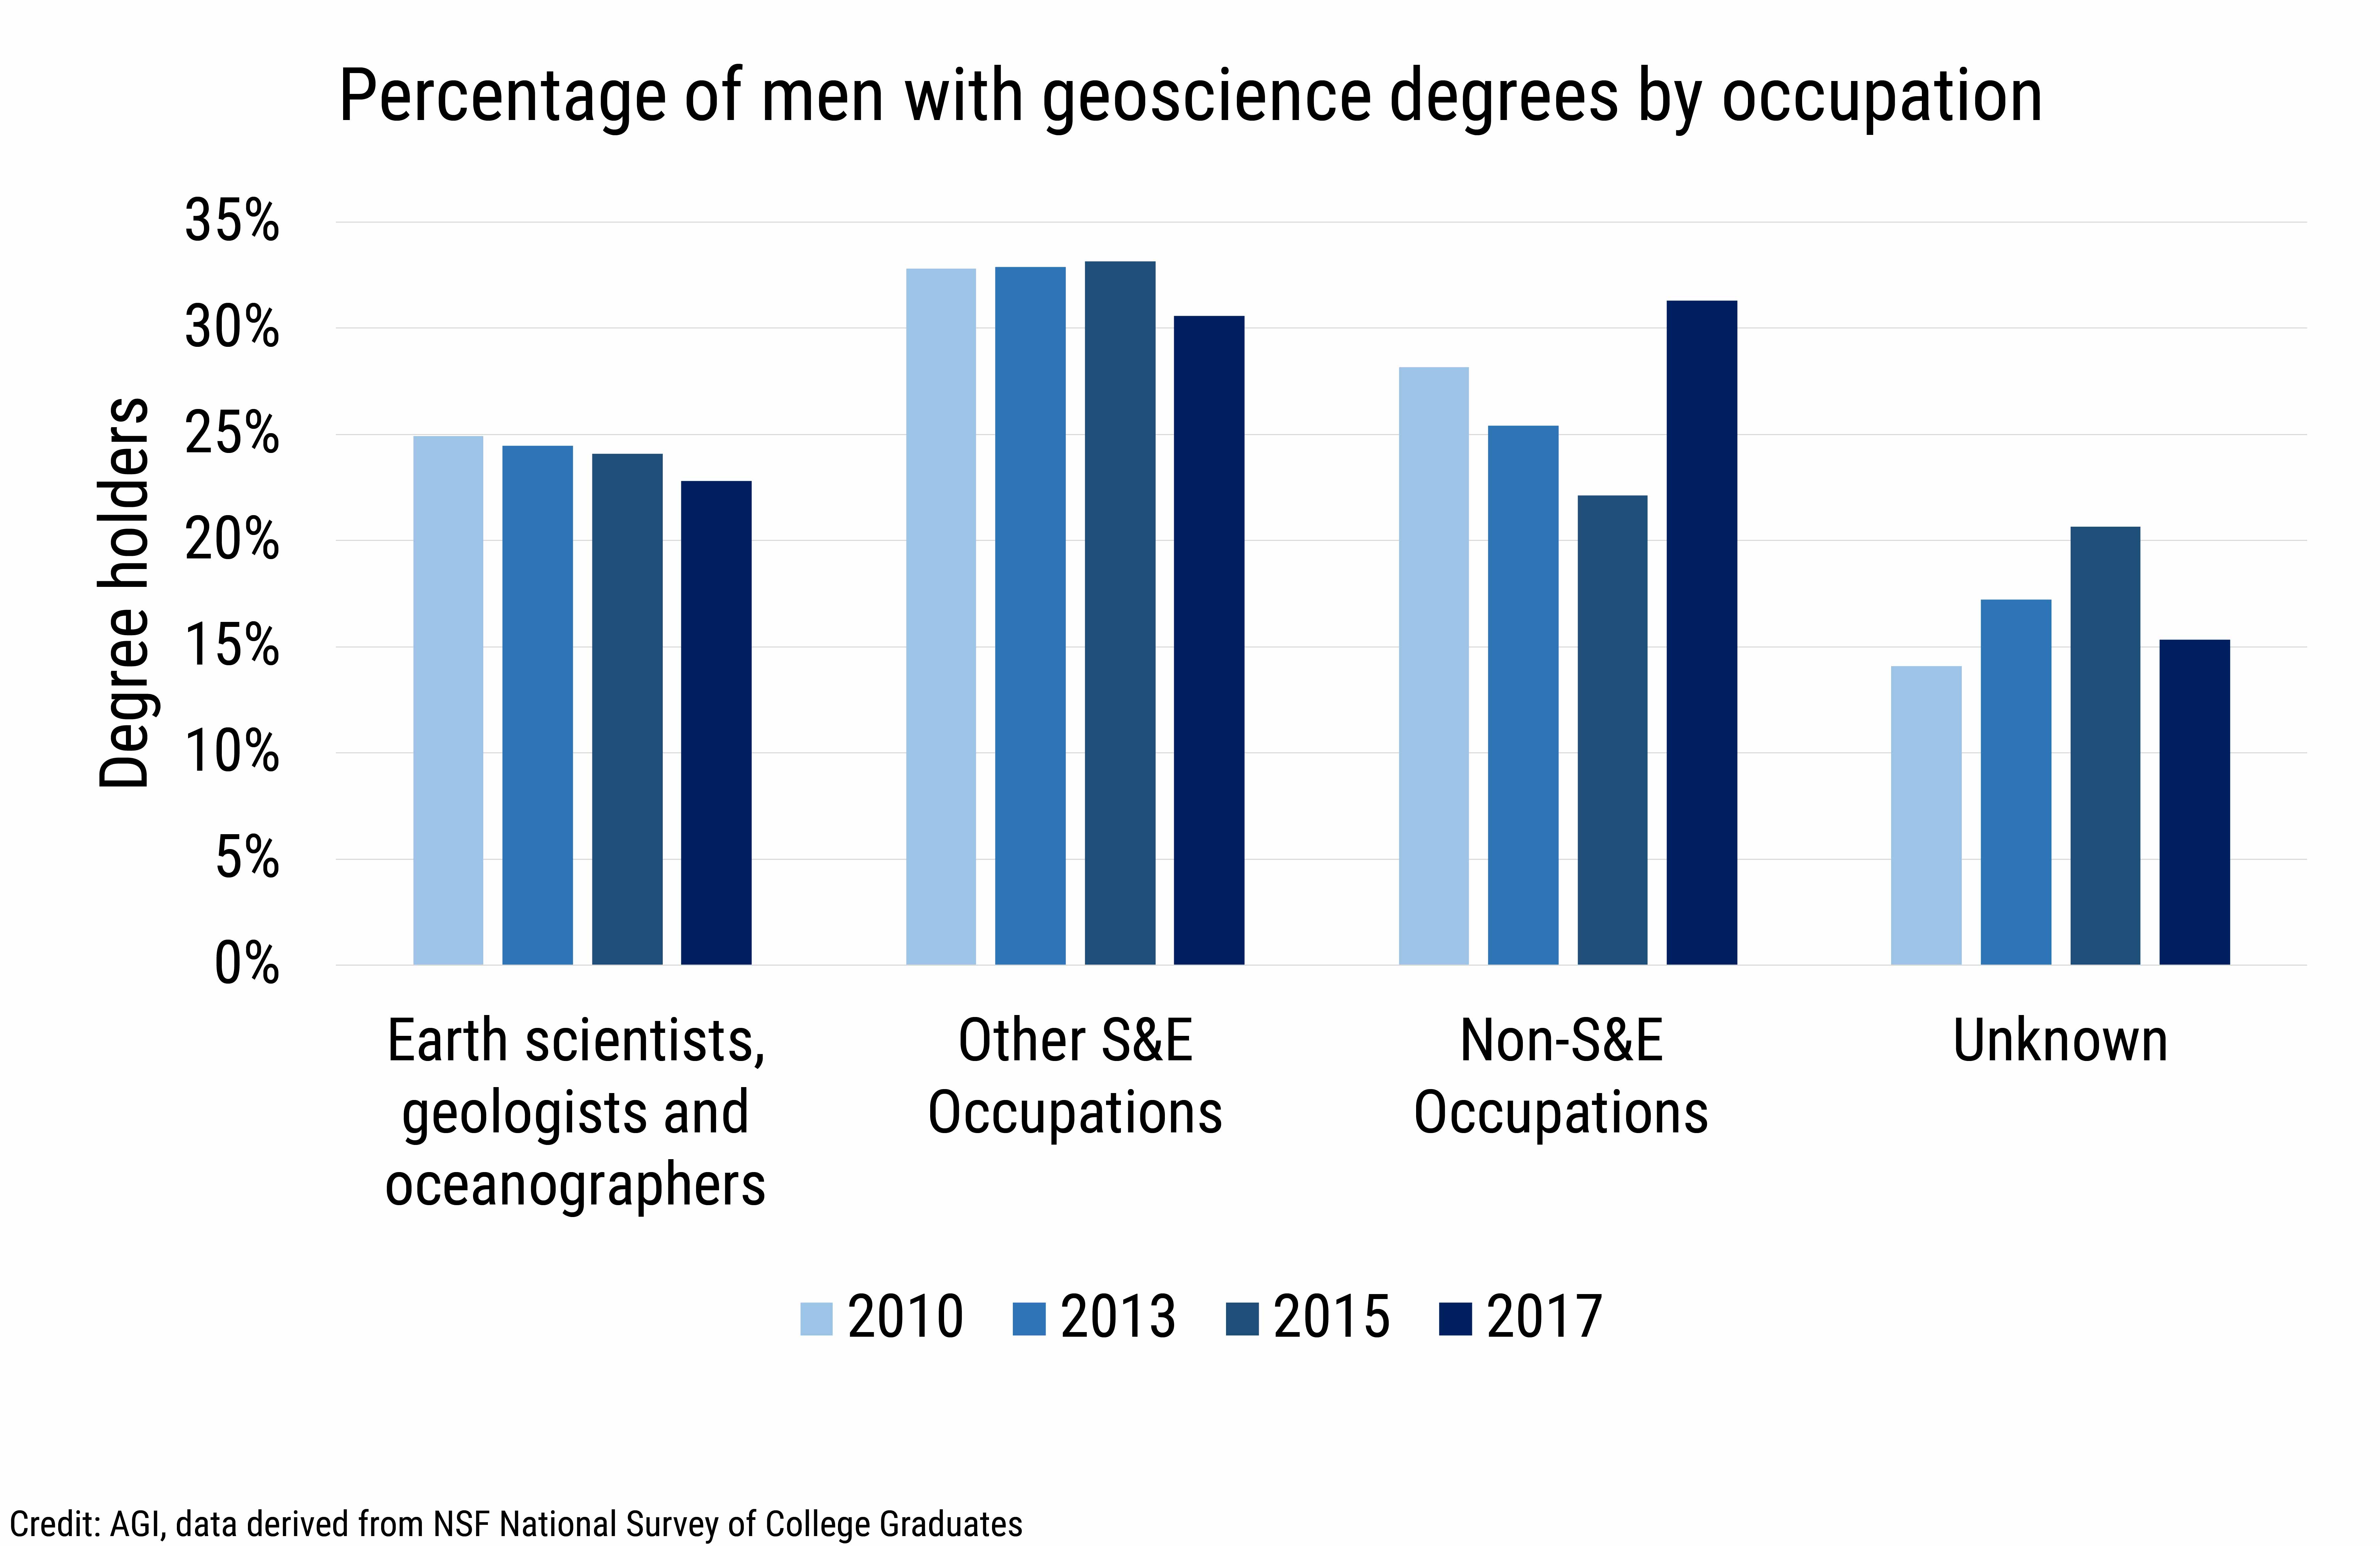 DB2020-023 chart13-Percentage of men with geoscience degrees by occupation (Credit: AGI, data derived from NSF National Survey of College Graduates)